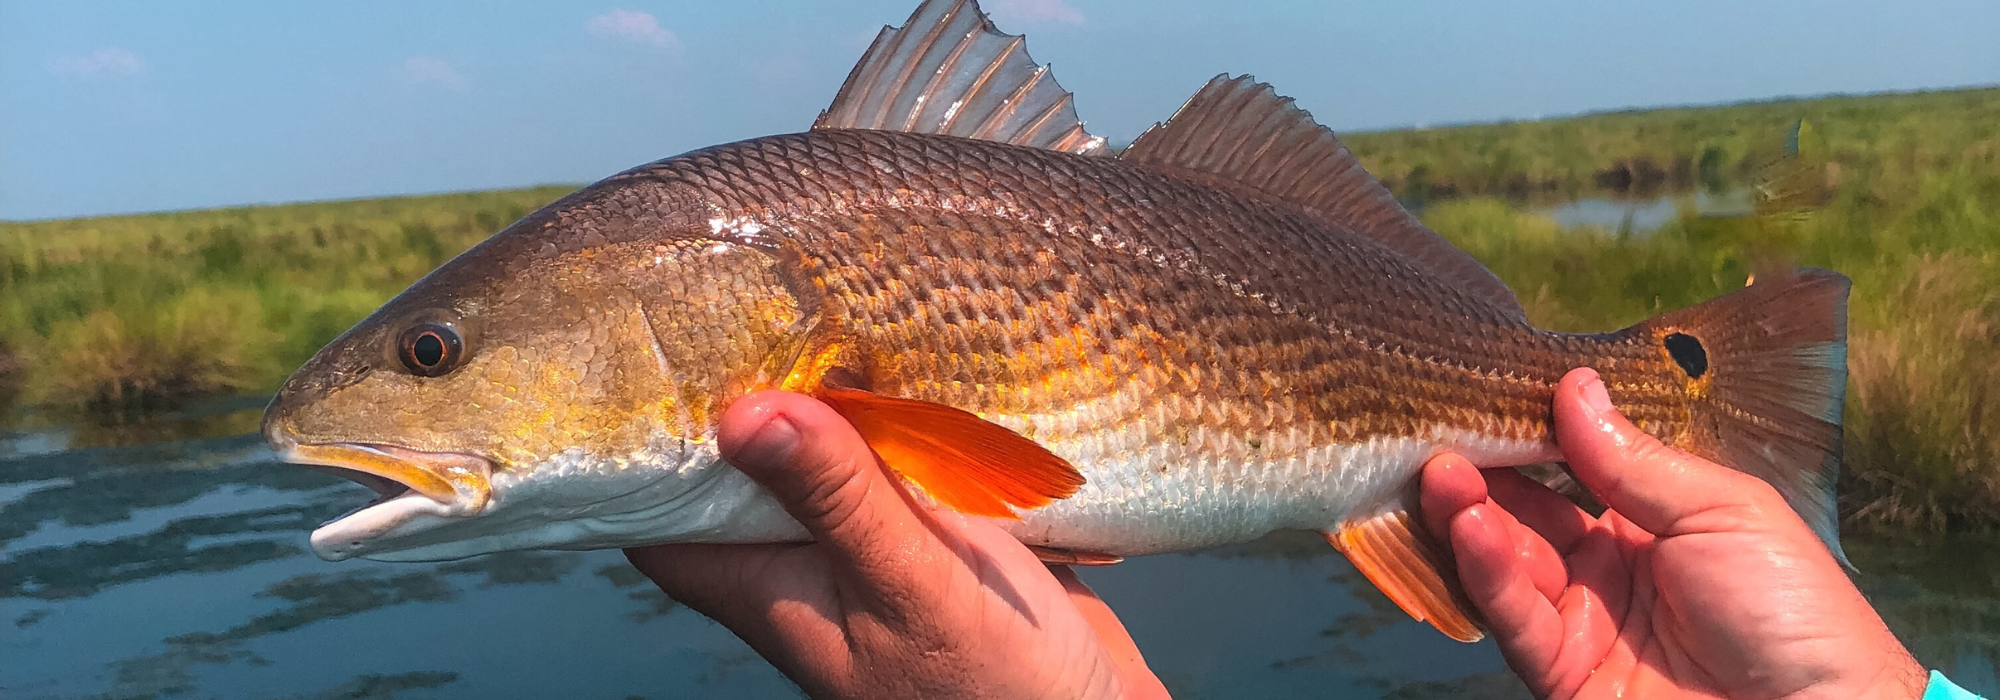 Take Action: Protect Georgia Redfish - One Hundred Miles